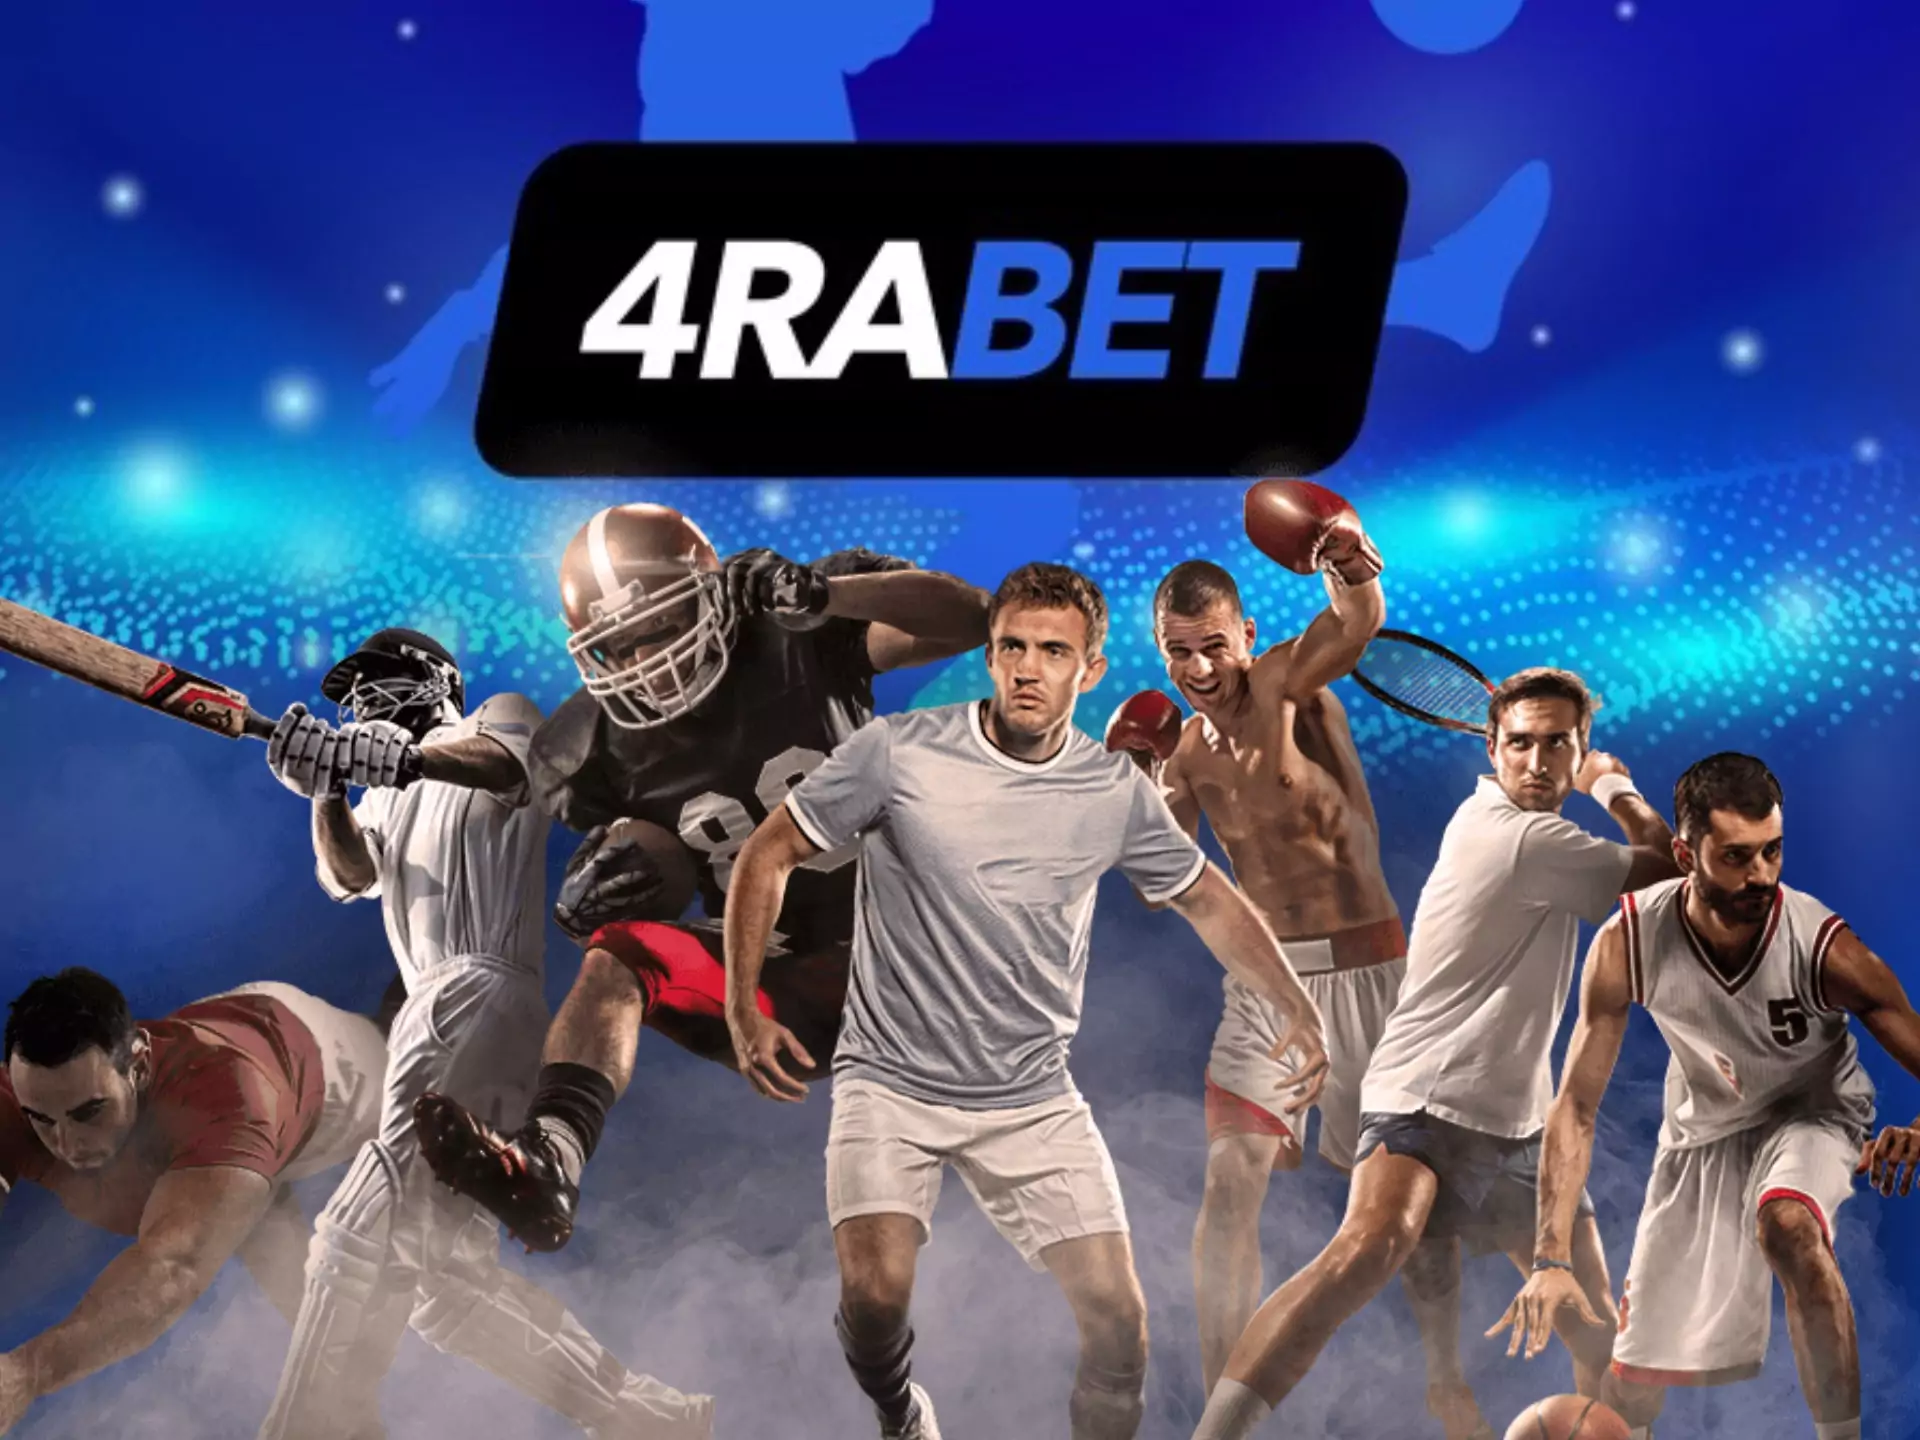 4rabet is a new and modern online sportsbook for convenient betting for Indian players.